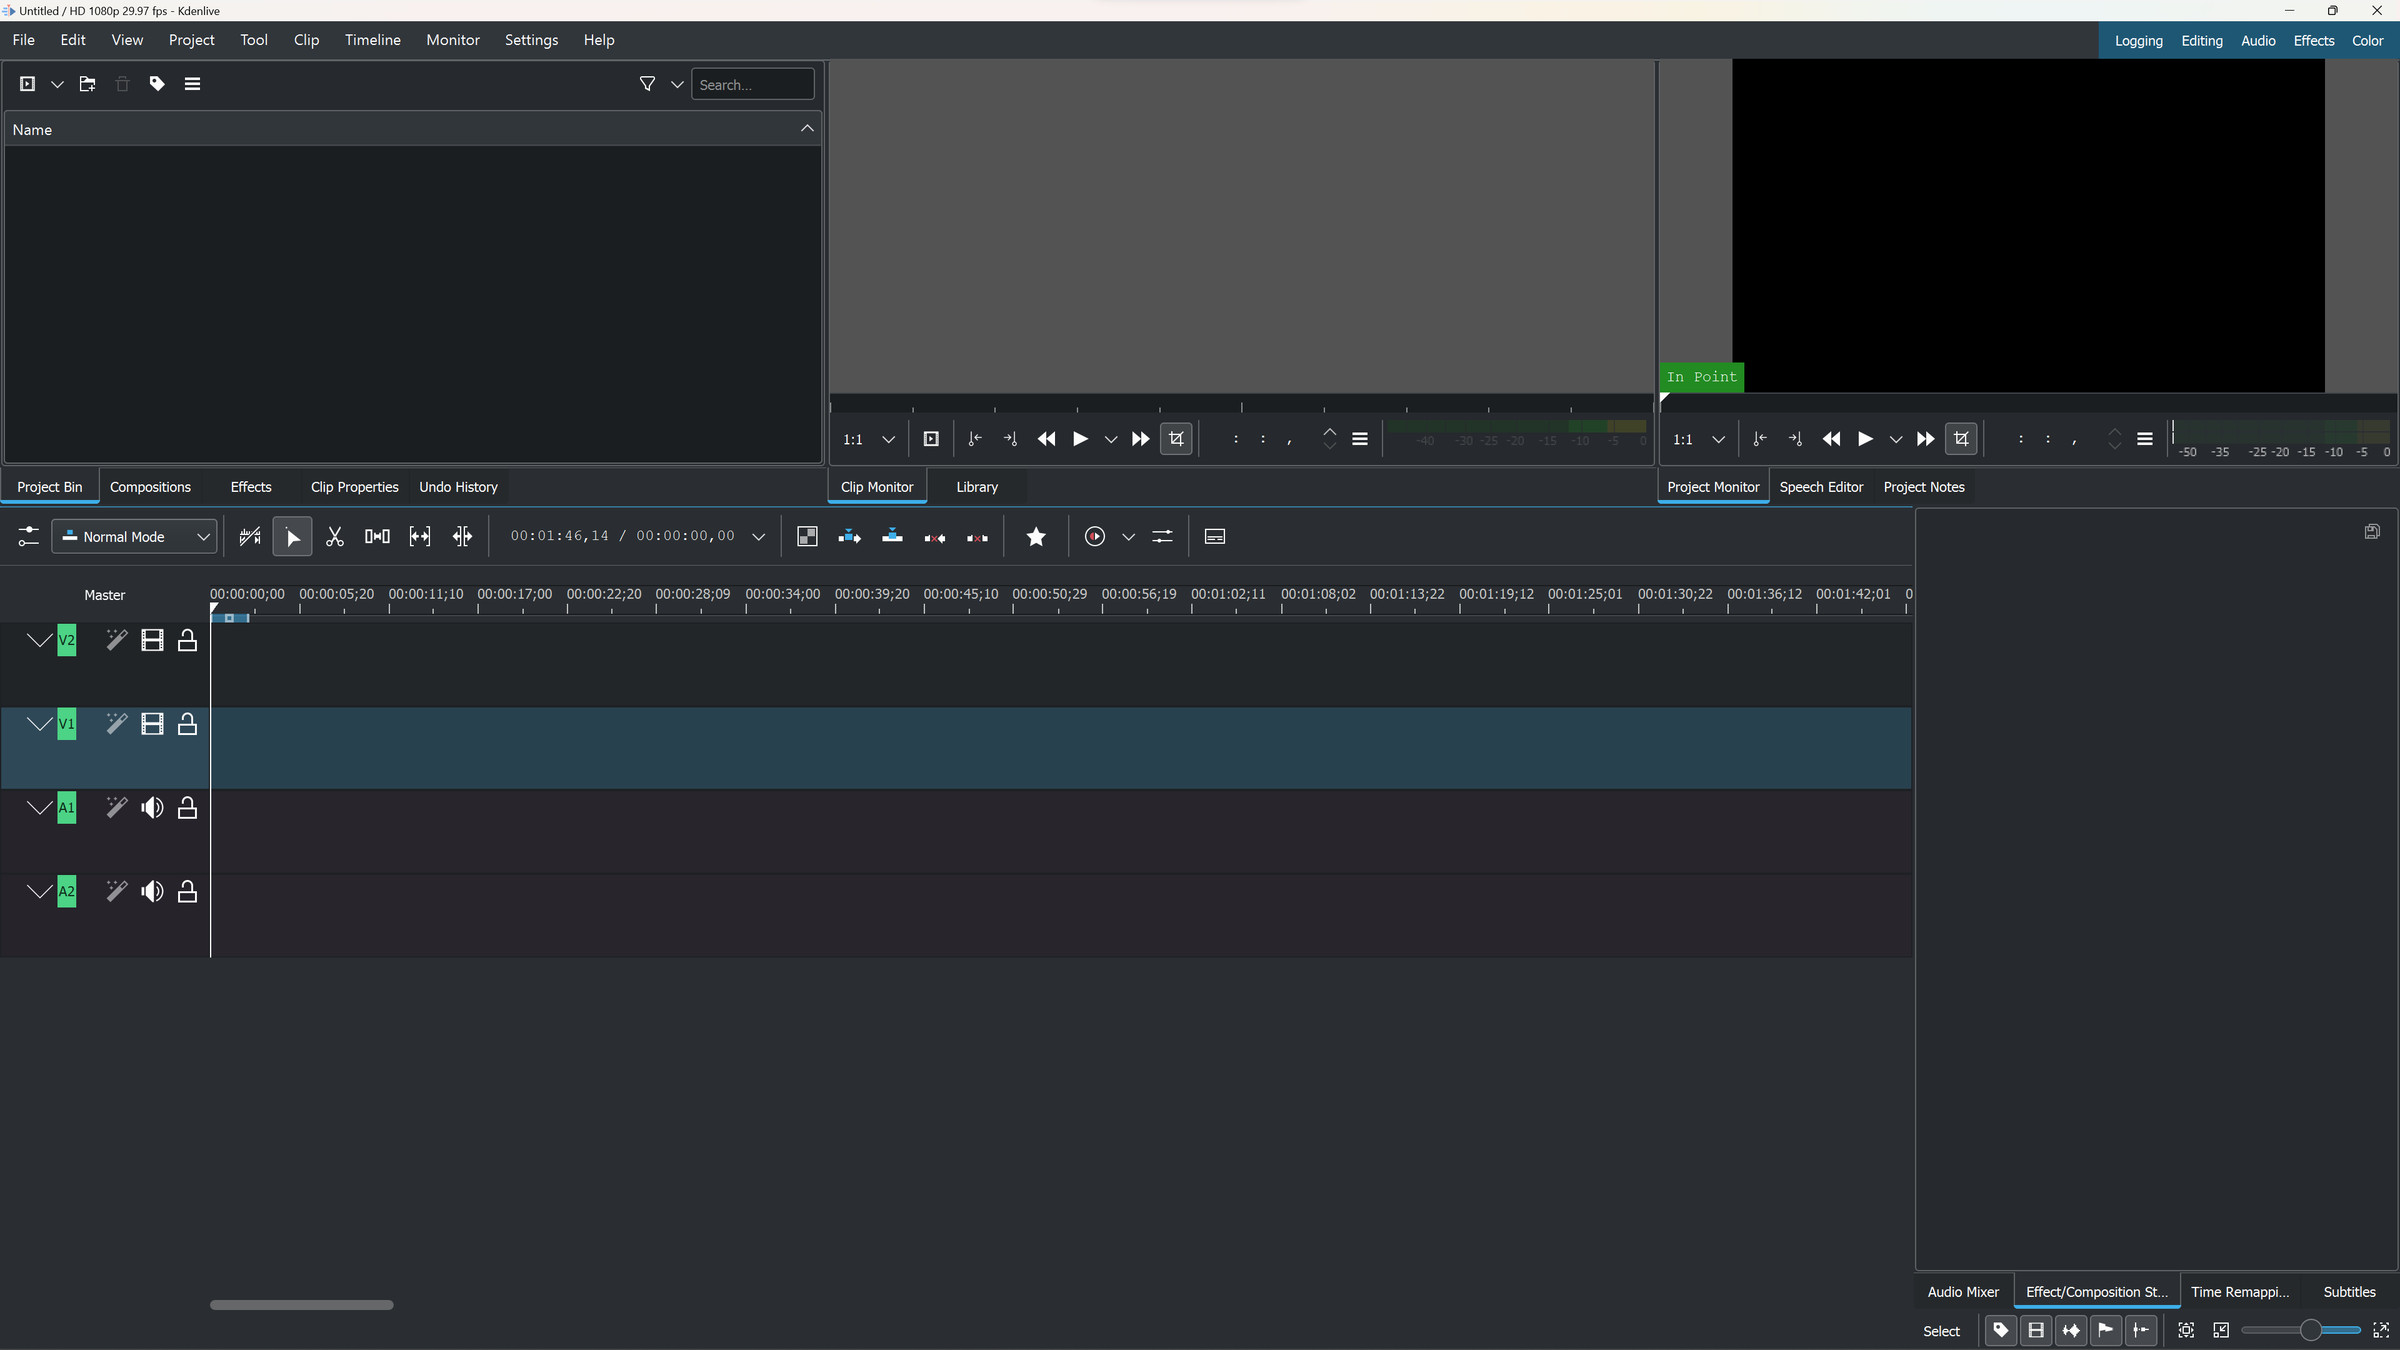 A screenshot of the interface of Kdenlive, video editing software.